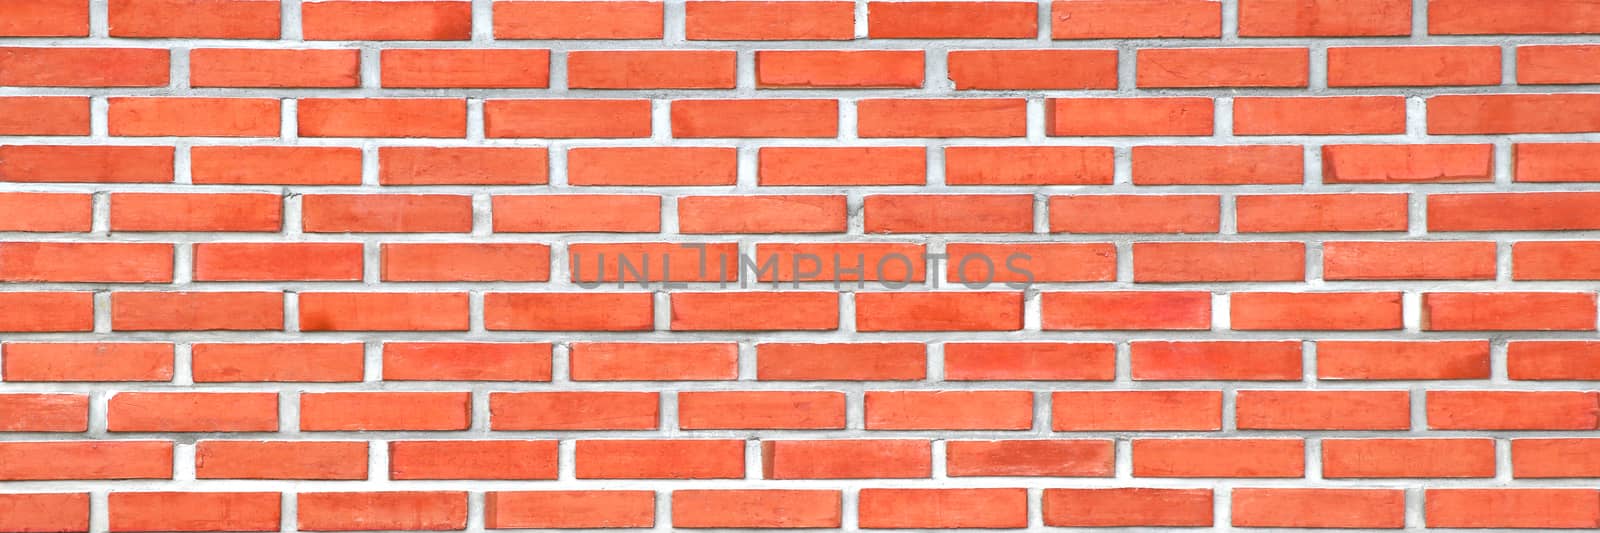 Red brick wall banner background. Brick wall texture background. by Eungsuwat